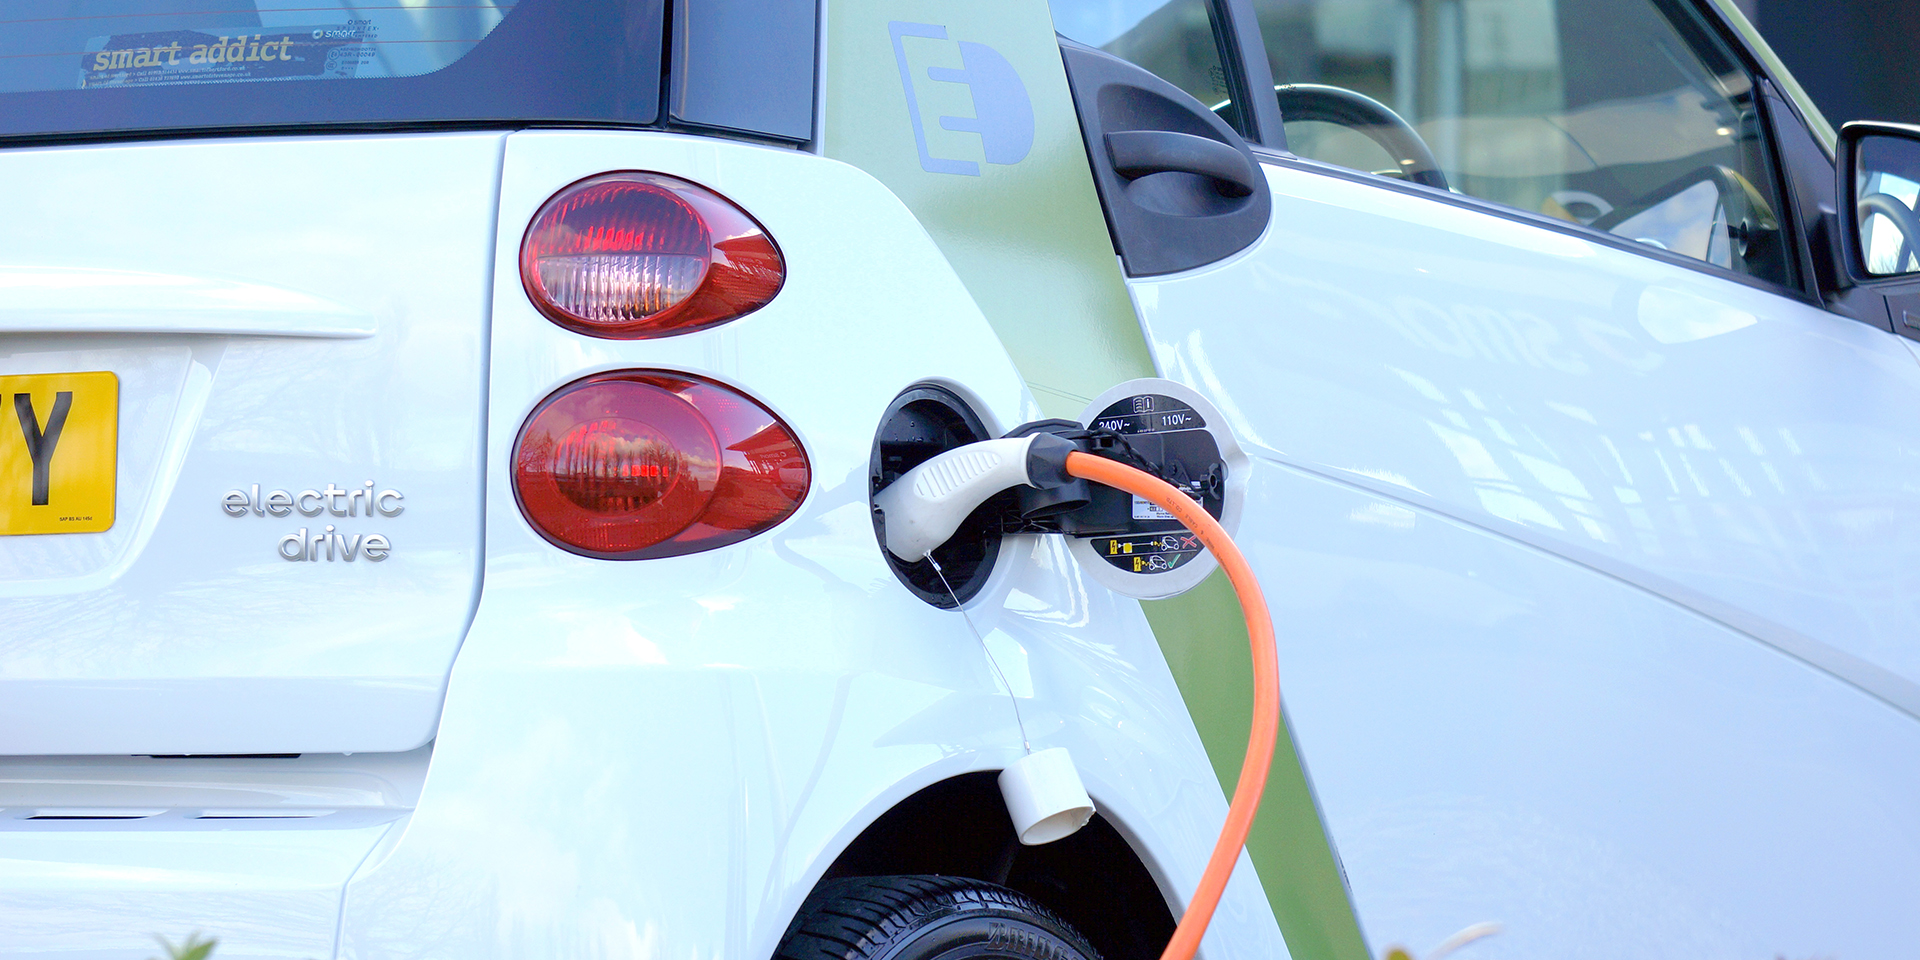 What differentiates between electric, plug-in, and hybrid vehicles?